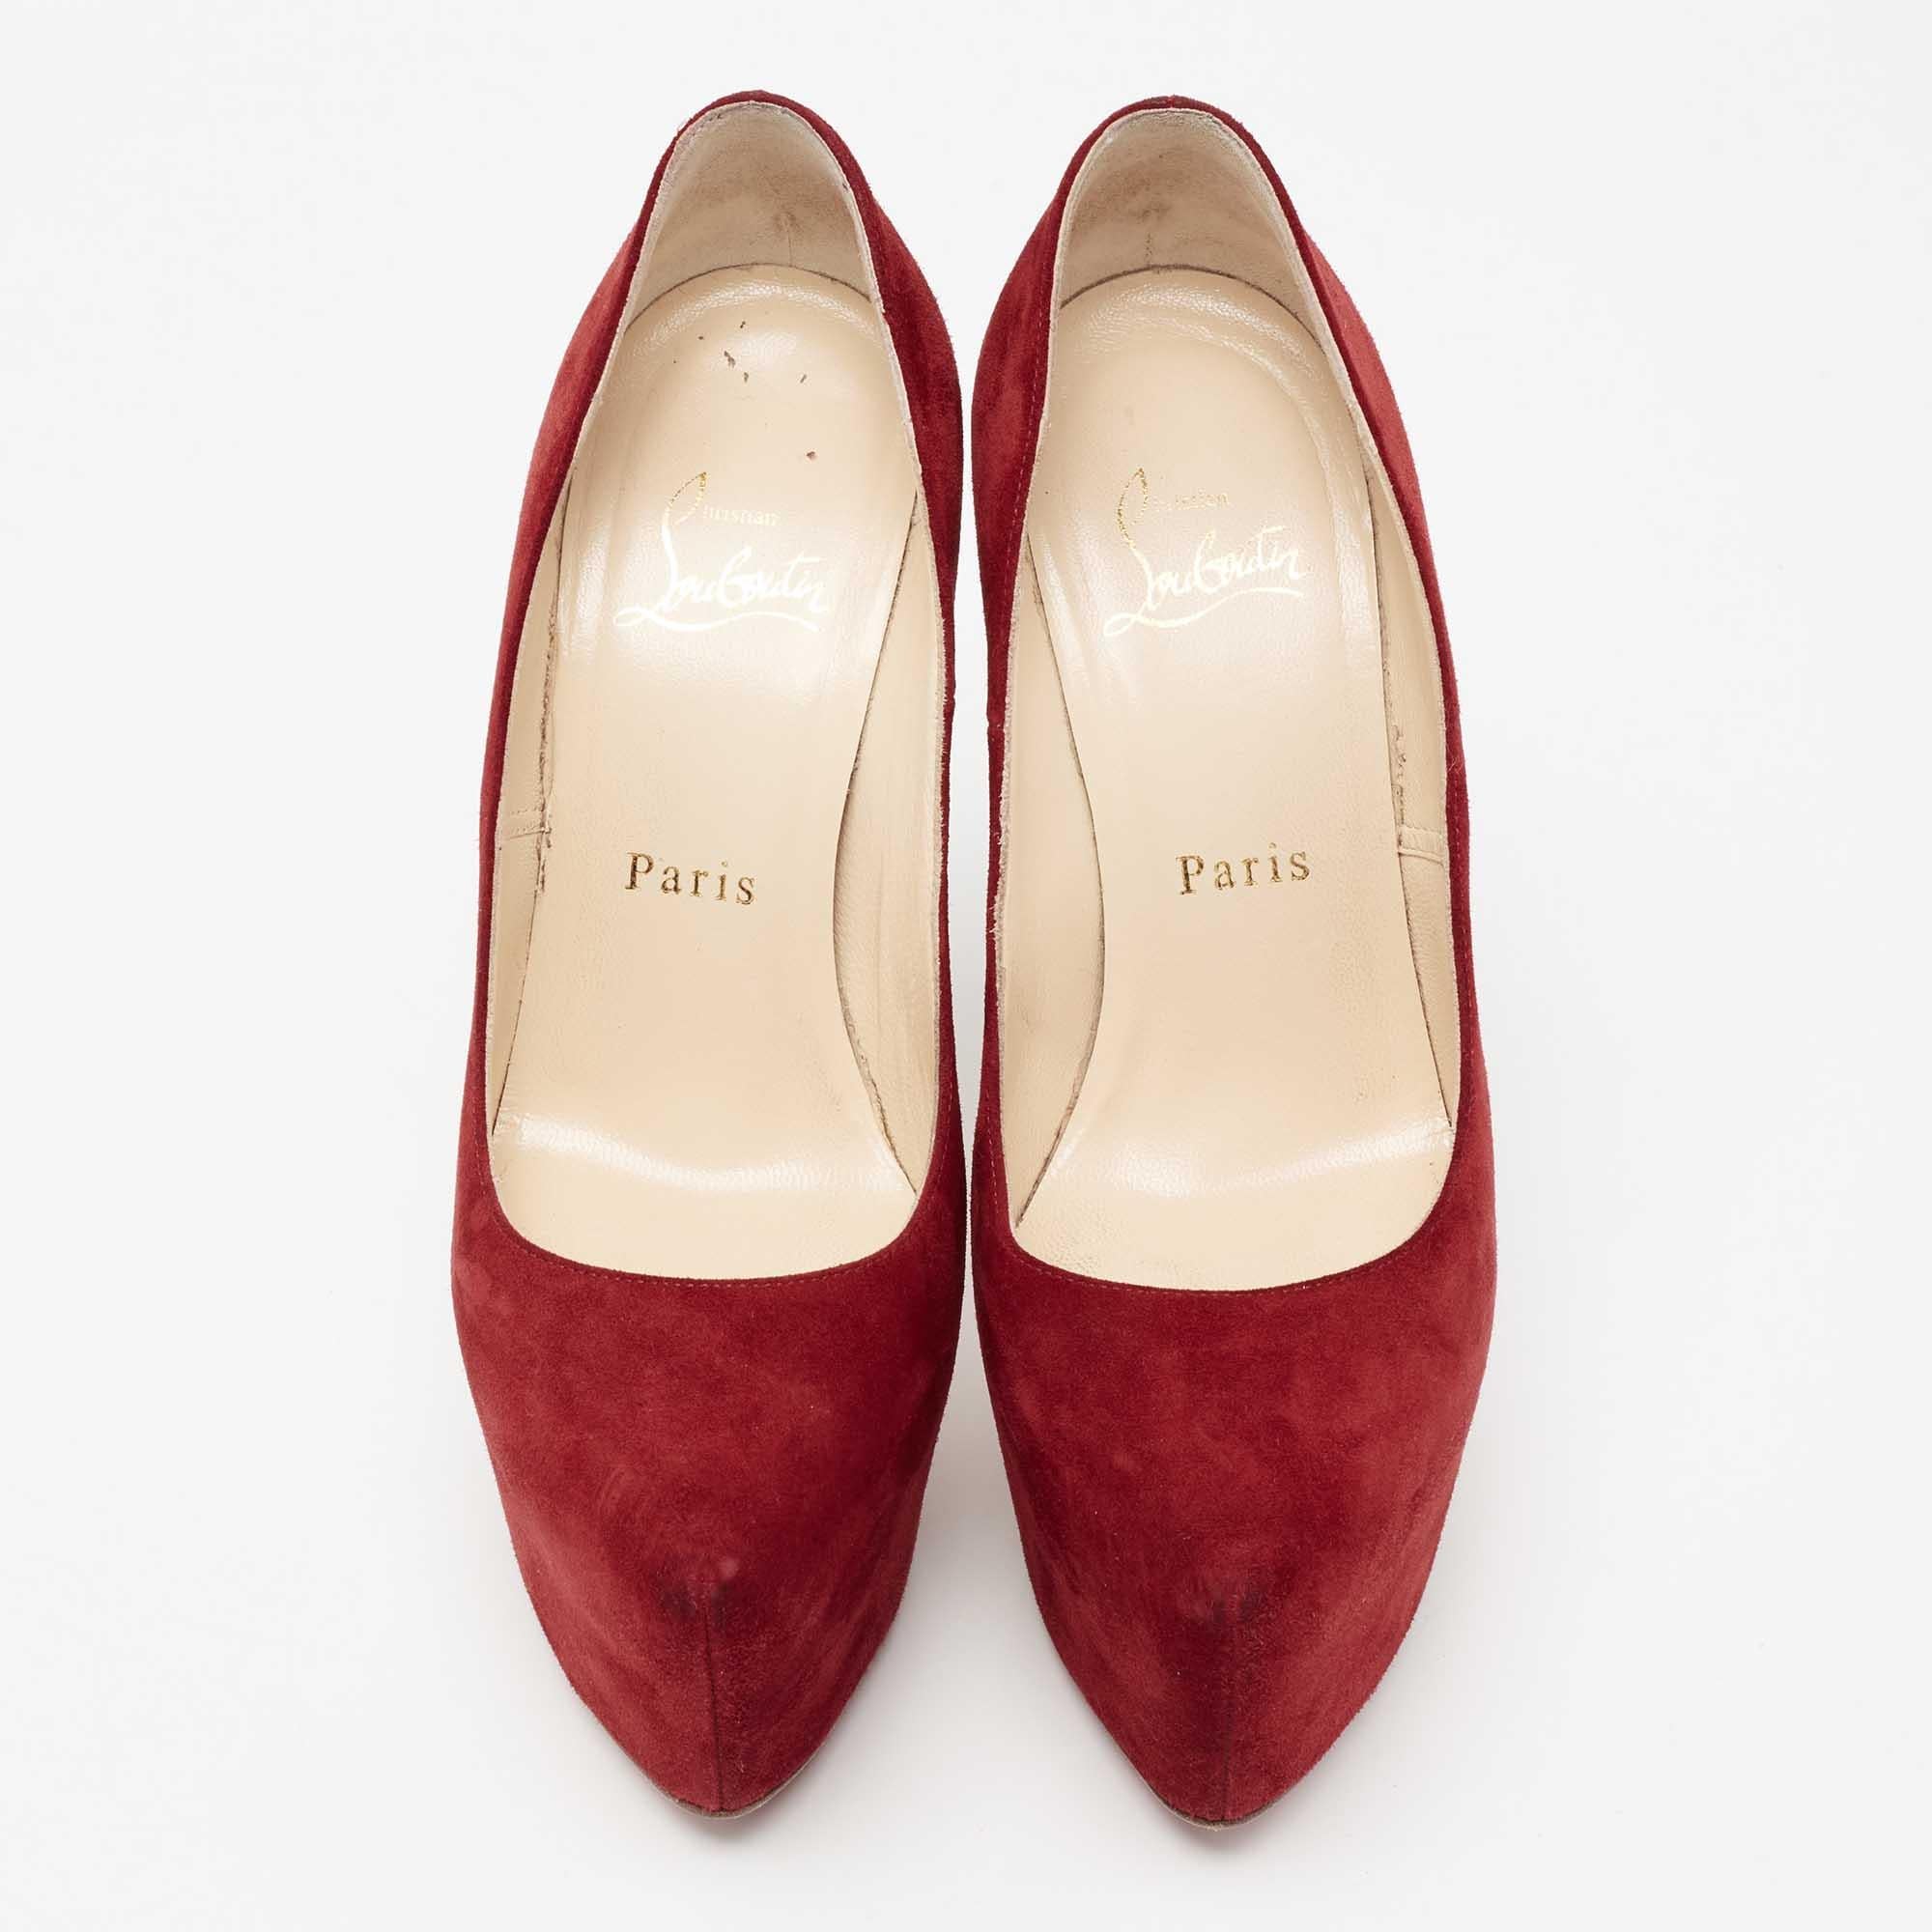 Christian Louboutin Deep Red Suede Daffodile Pumps Size 36.5 In Good Condition For Sale In Dubai, Al Qouz 2